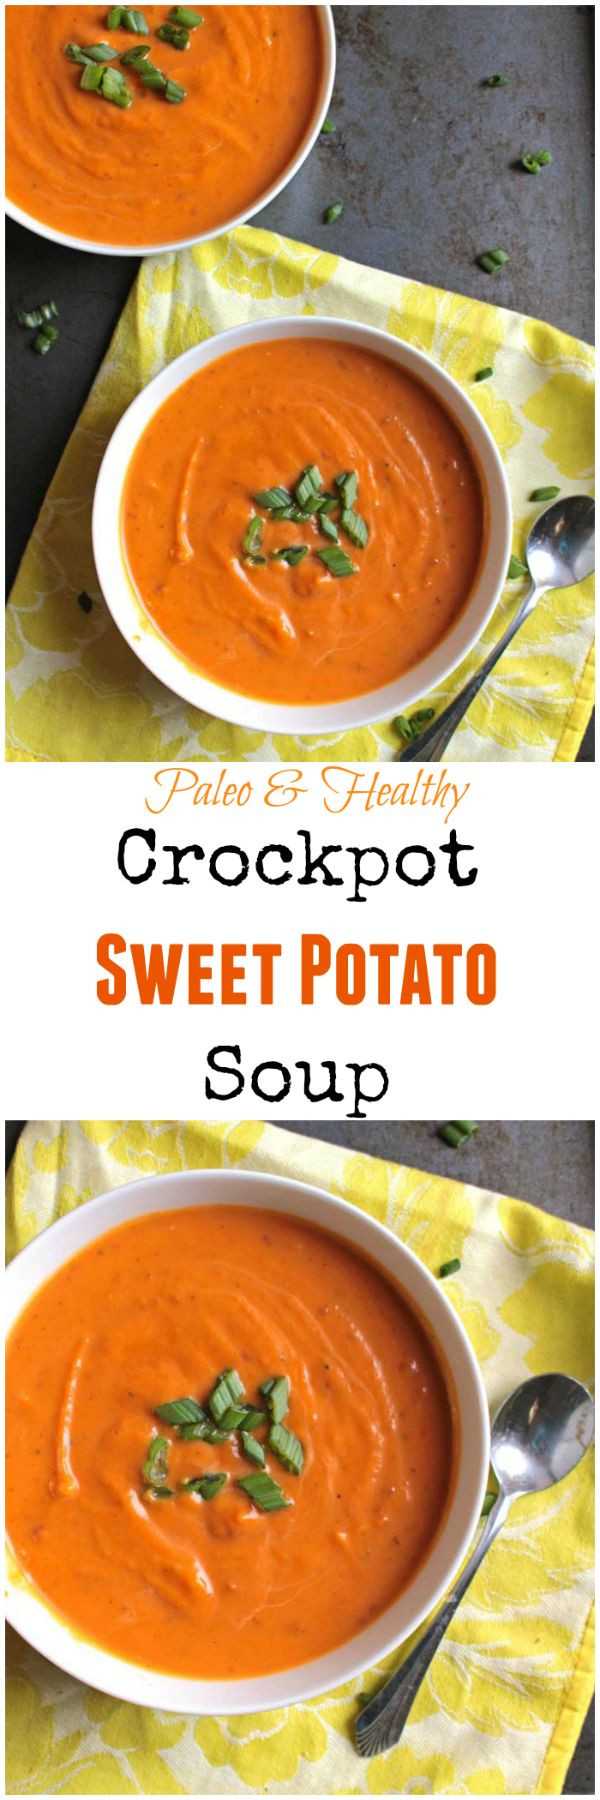 The Best Ideas for Sweet Potato soup Paleo - Best Recipes Ideas and ...